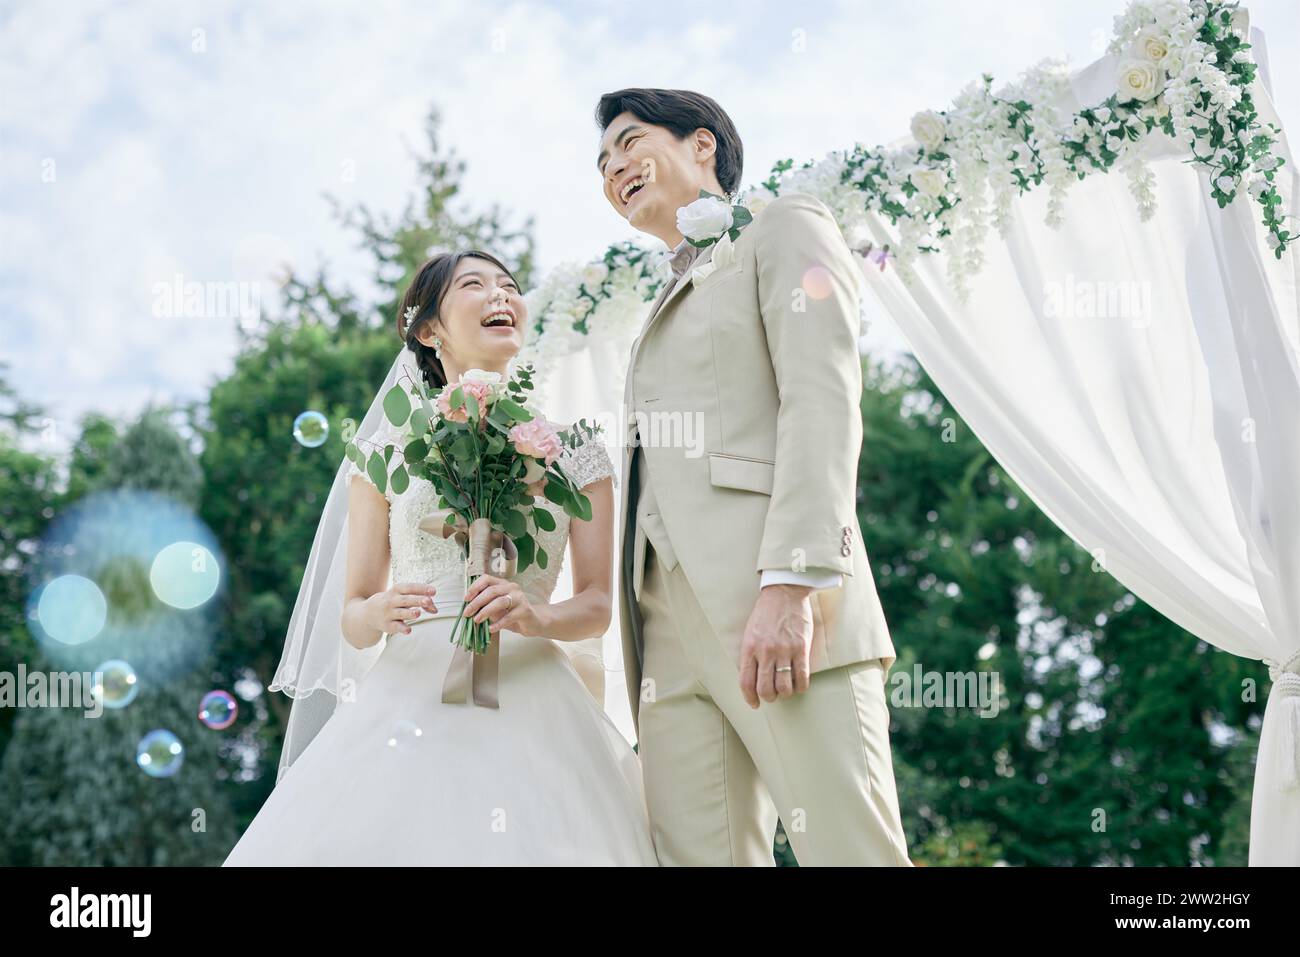 A newly married couple standing under a wedding arch Stock Photo